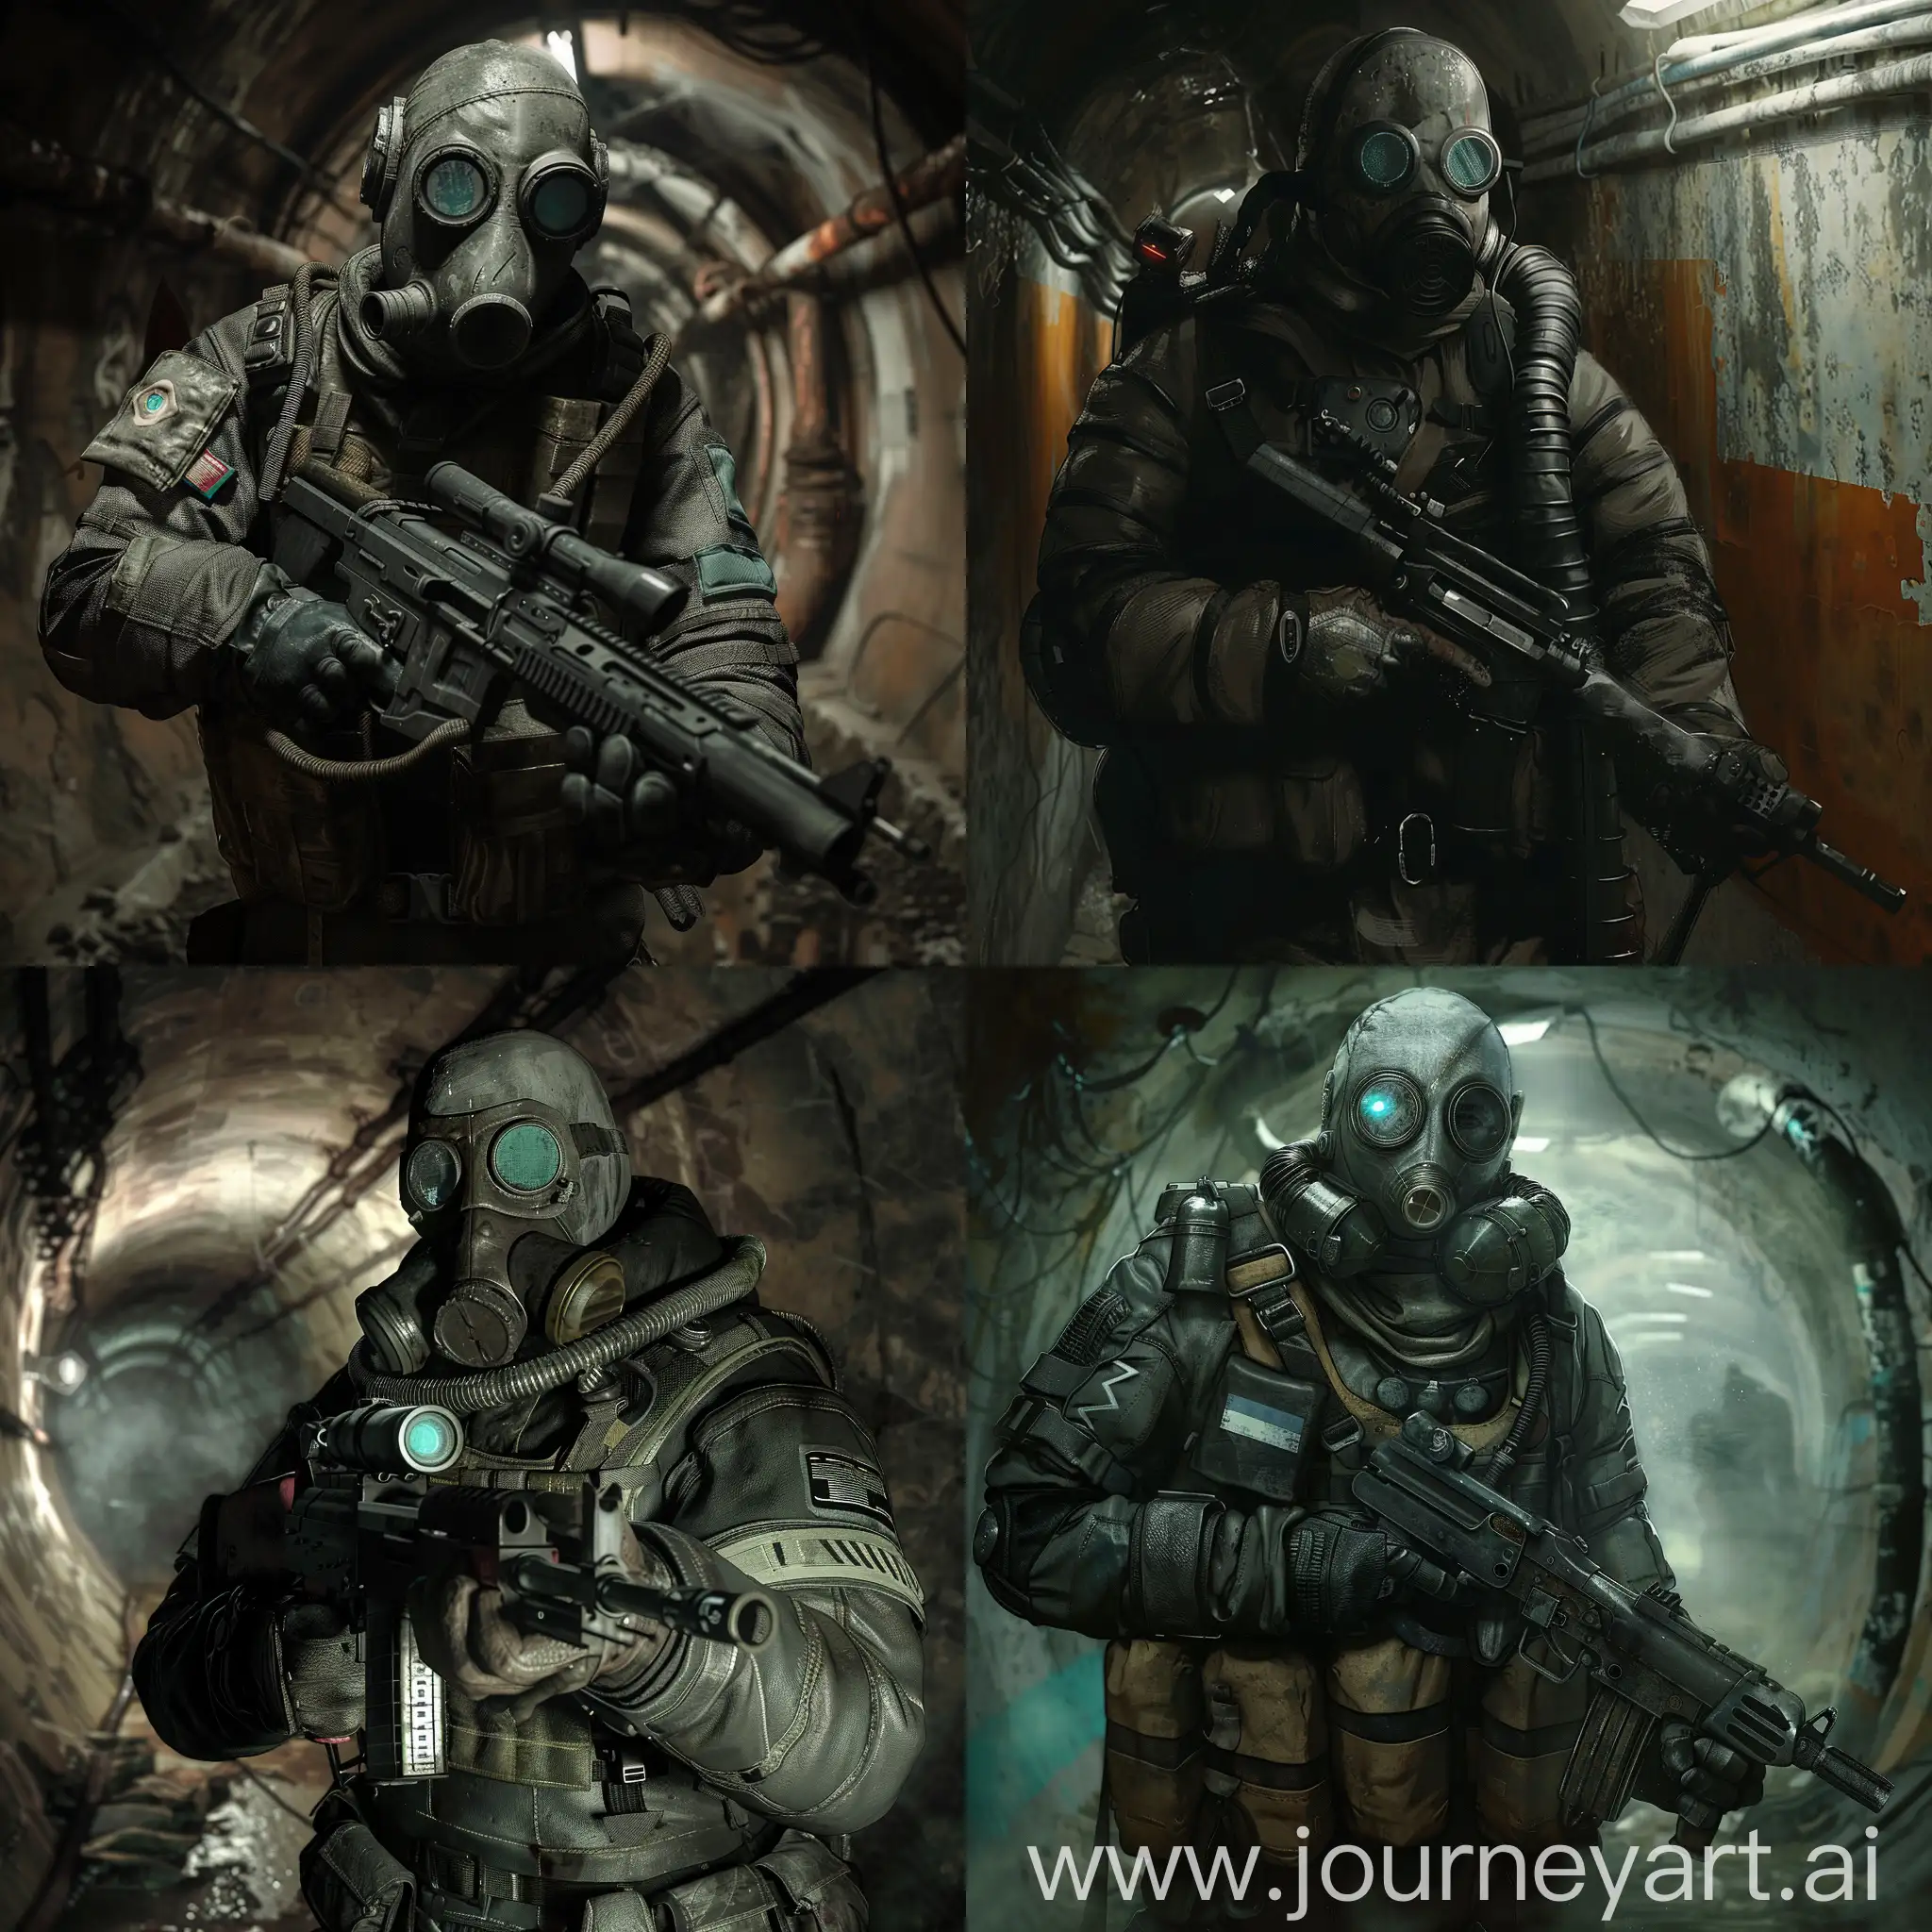 Survivor-in-PostApocalyptic-Armor-with-Soviet-Sniper-Rifle-in-Abandoned-Catacombs